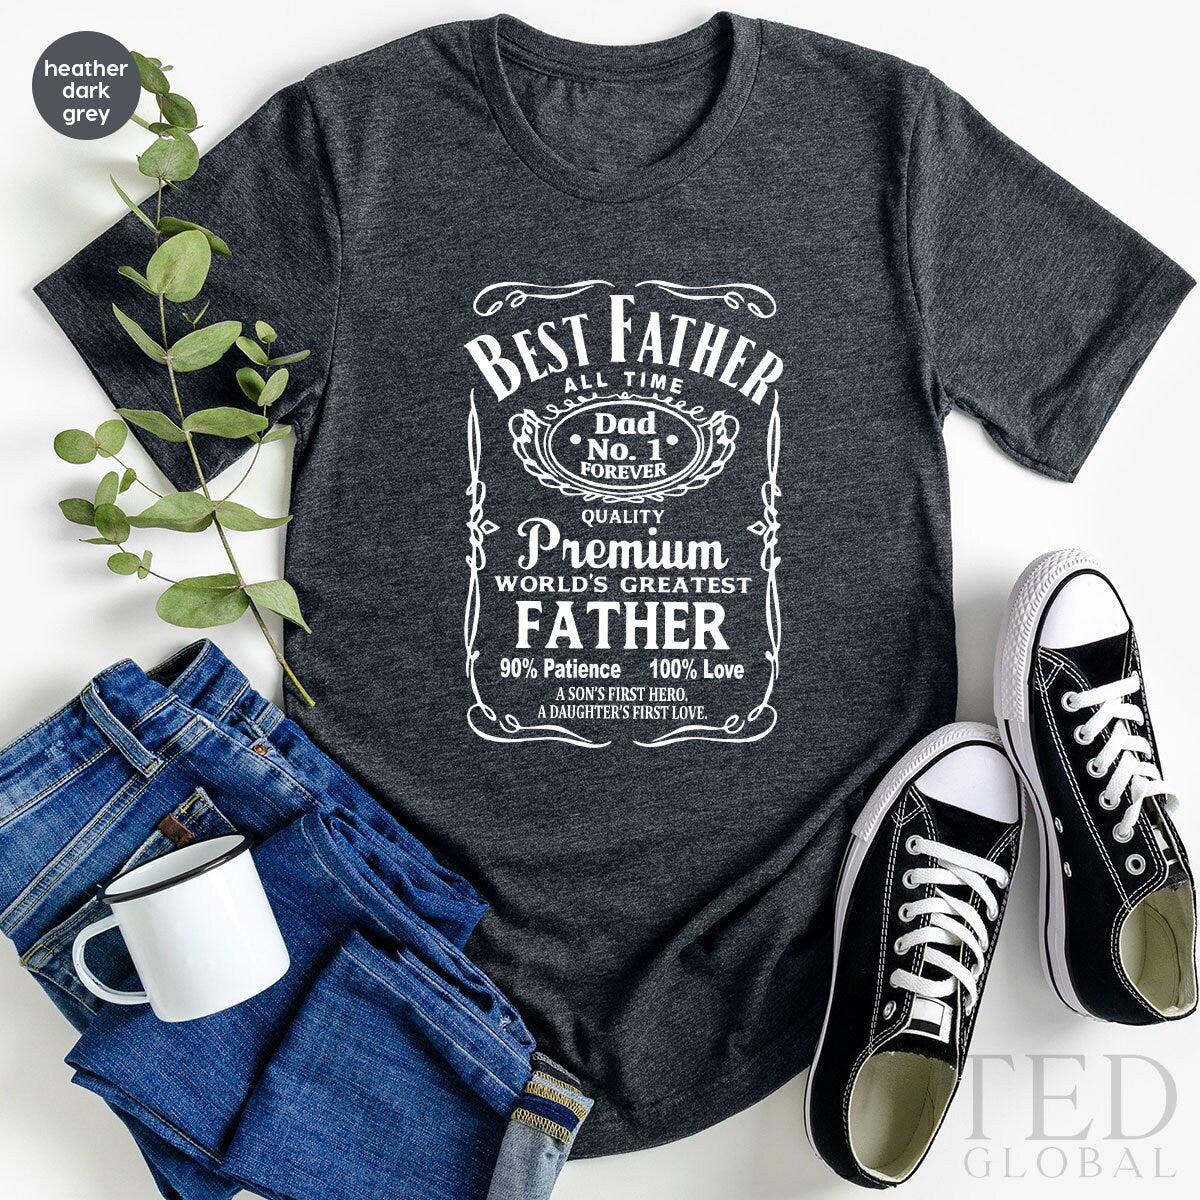 Best Father Shirt, Fathers Day Tee, Dad Shirt, Daddy T Shirt, Gifts For Dad, Worlds Greatest Father Shirt, Fathers Day Gift - Fastdeliverytees.com